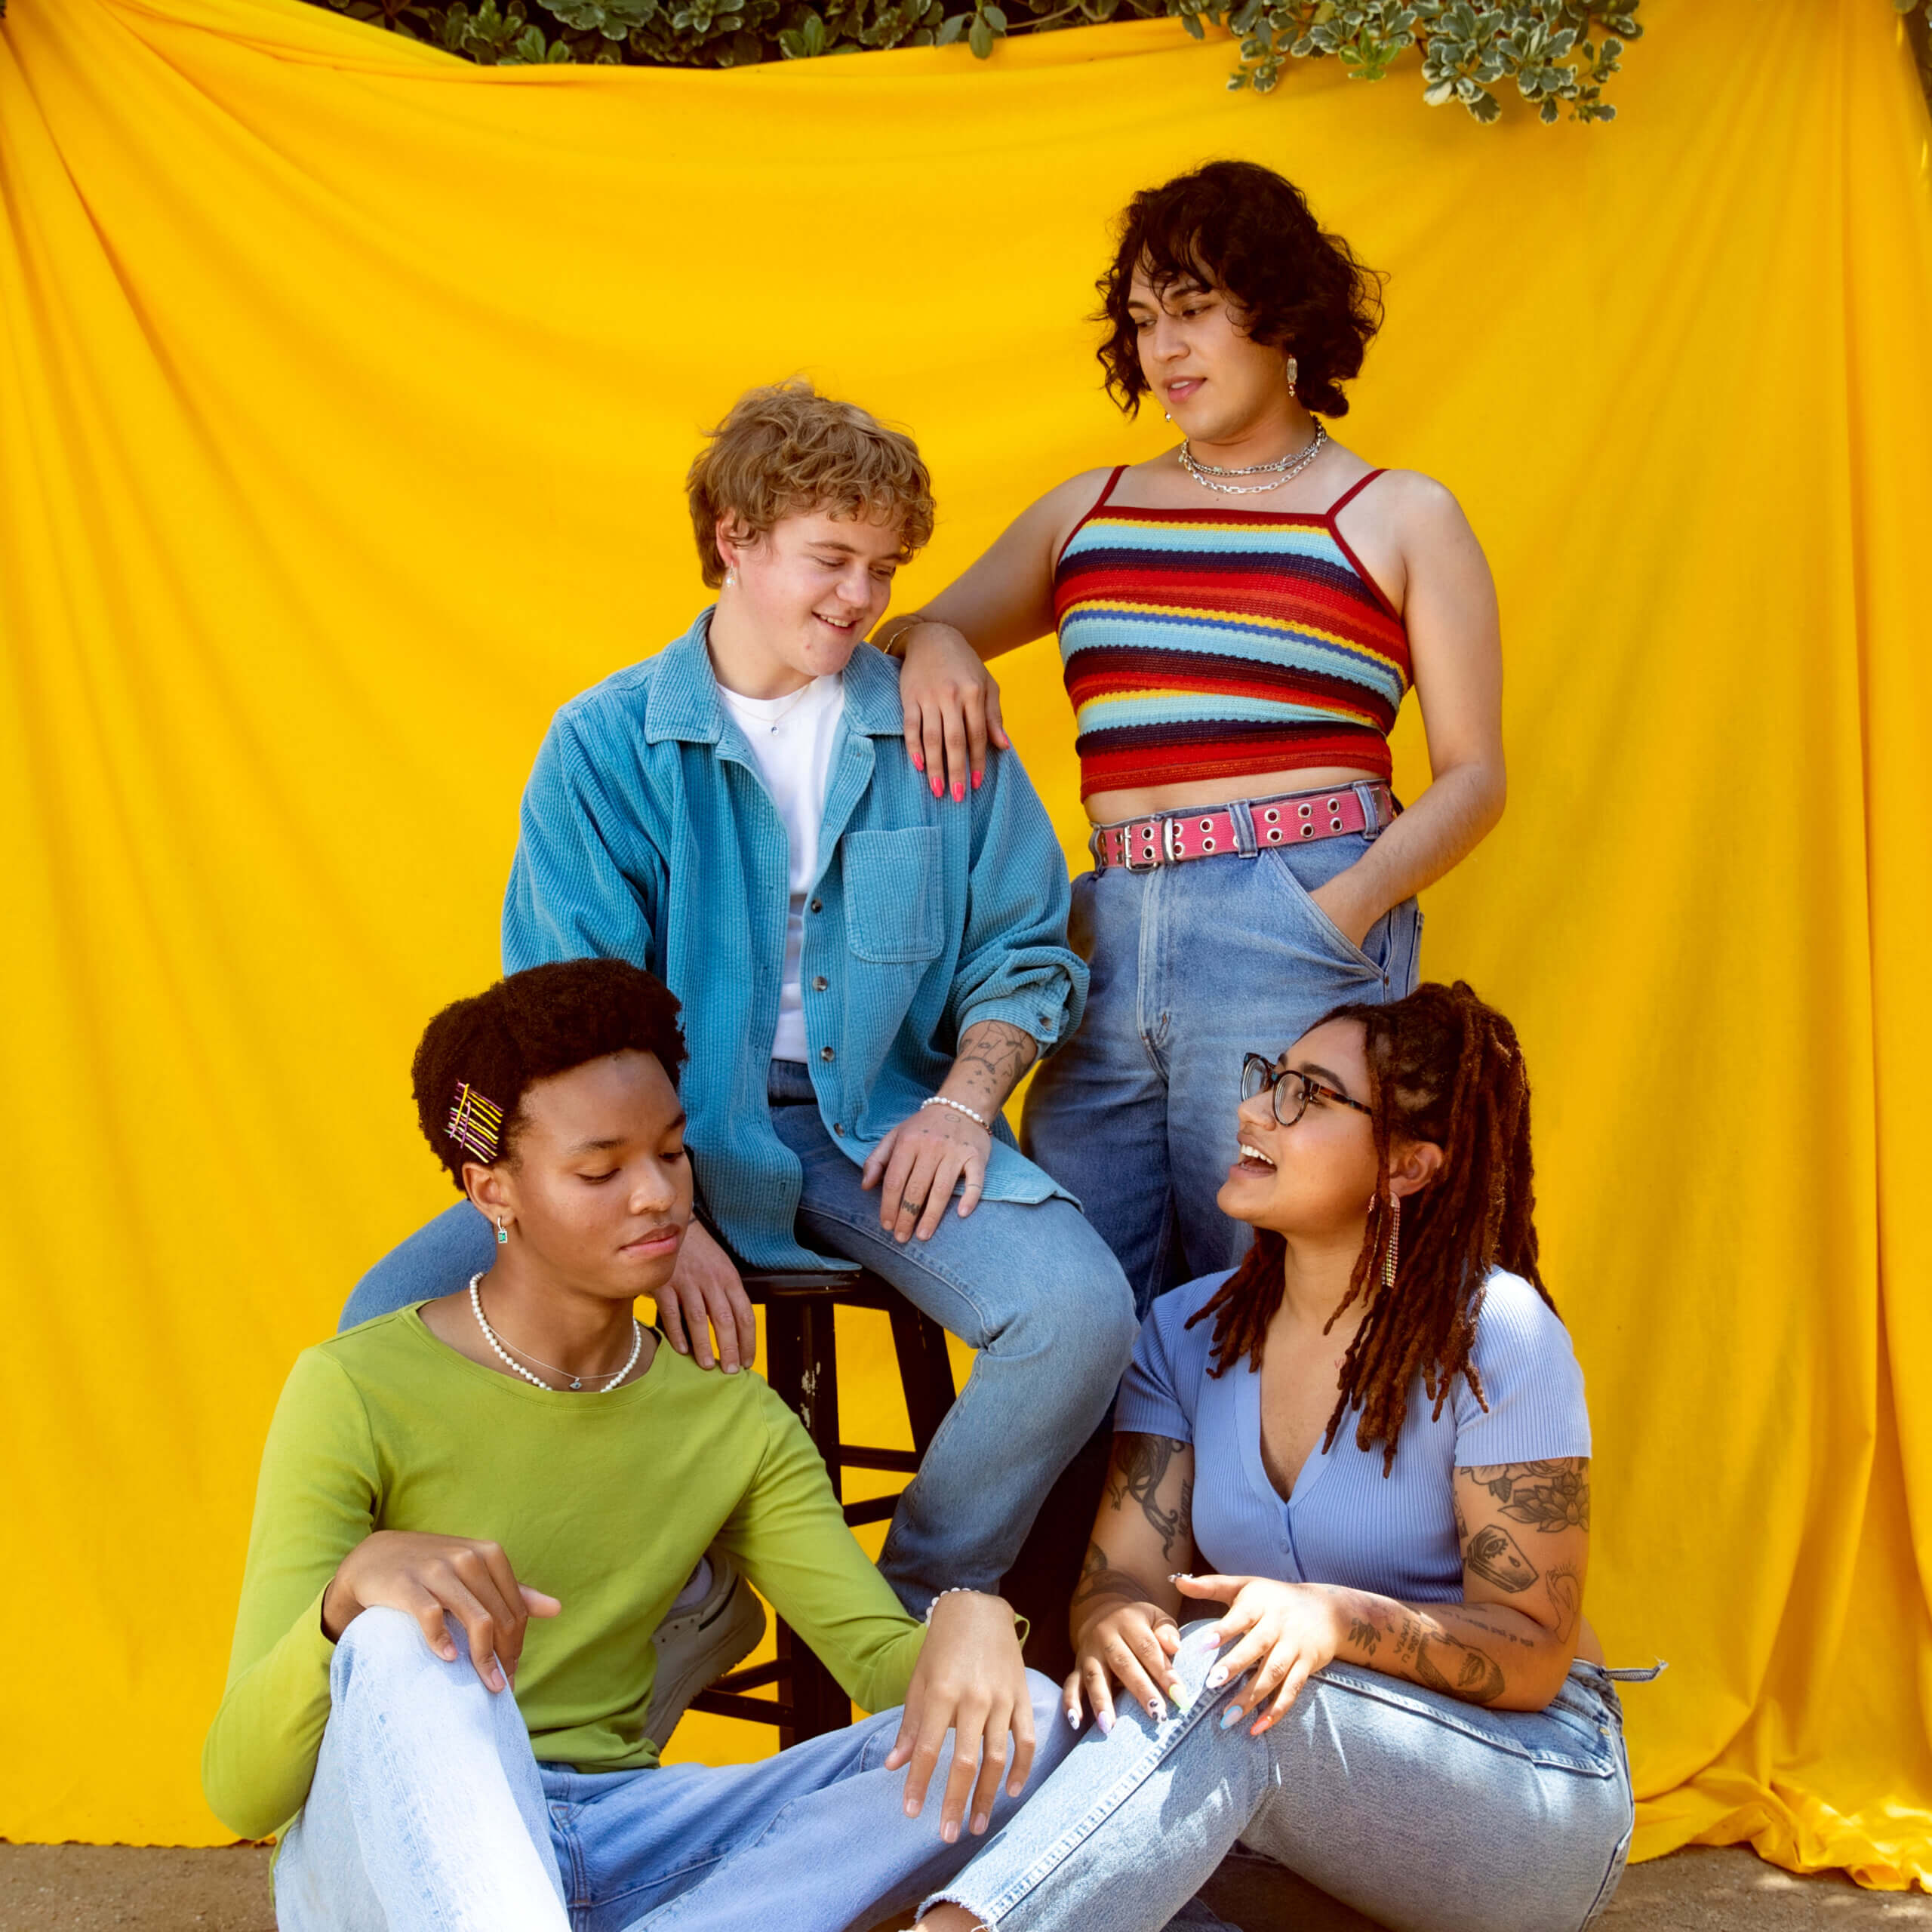 Four young people in colorful clothing standing against a yellow backdrop talking.